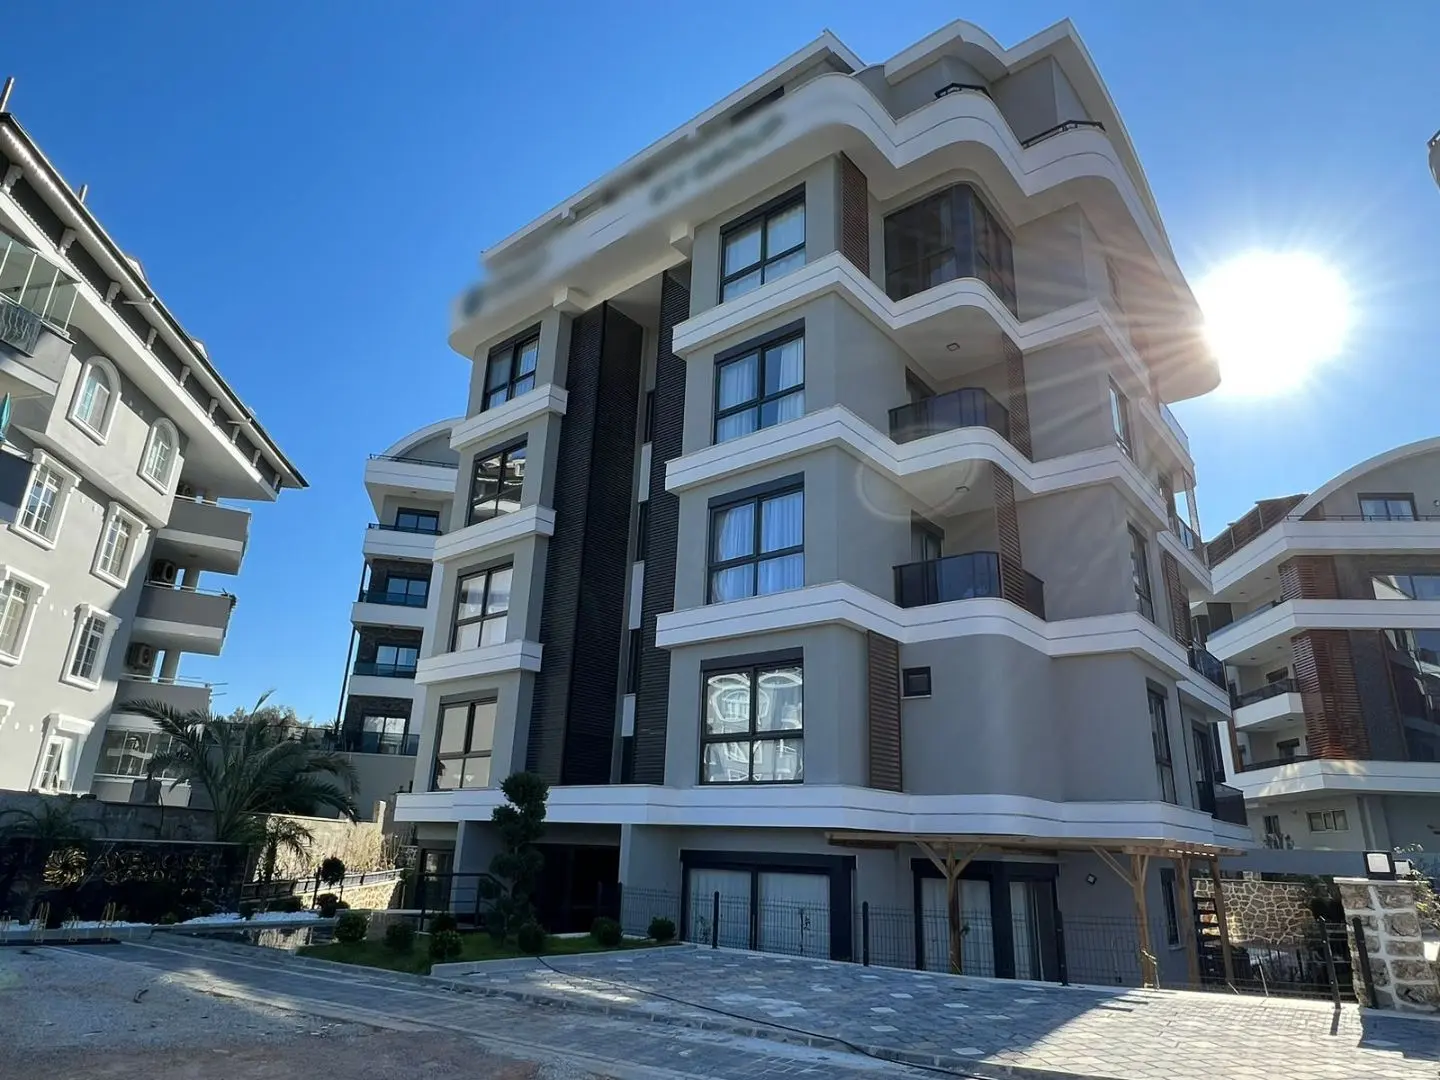 NEW AND FURNISHED 1+1 FLAT IN ALANYA OBA